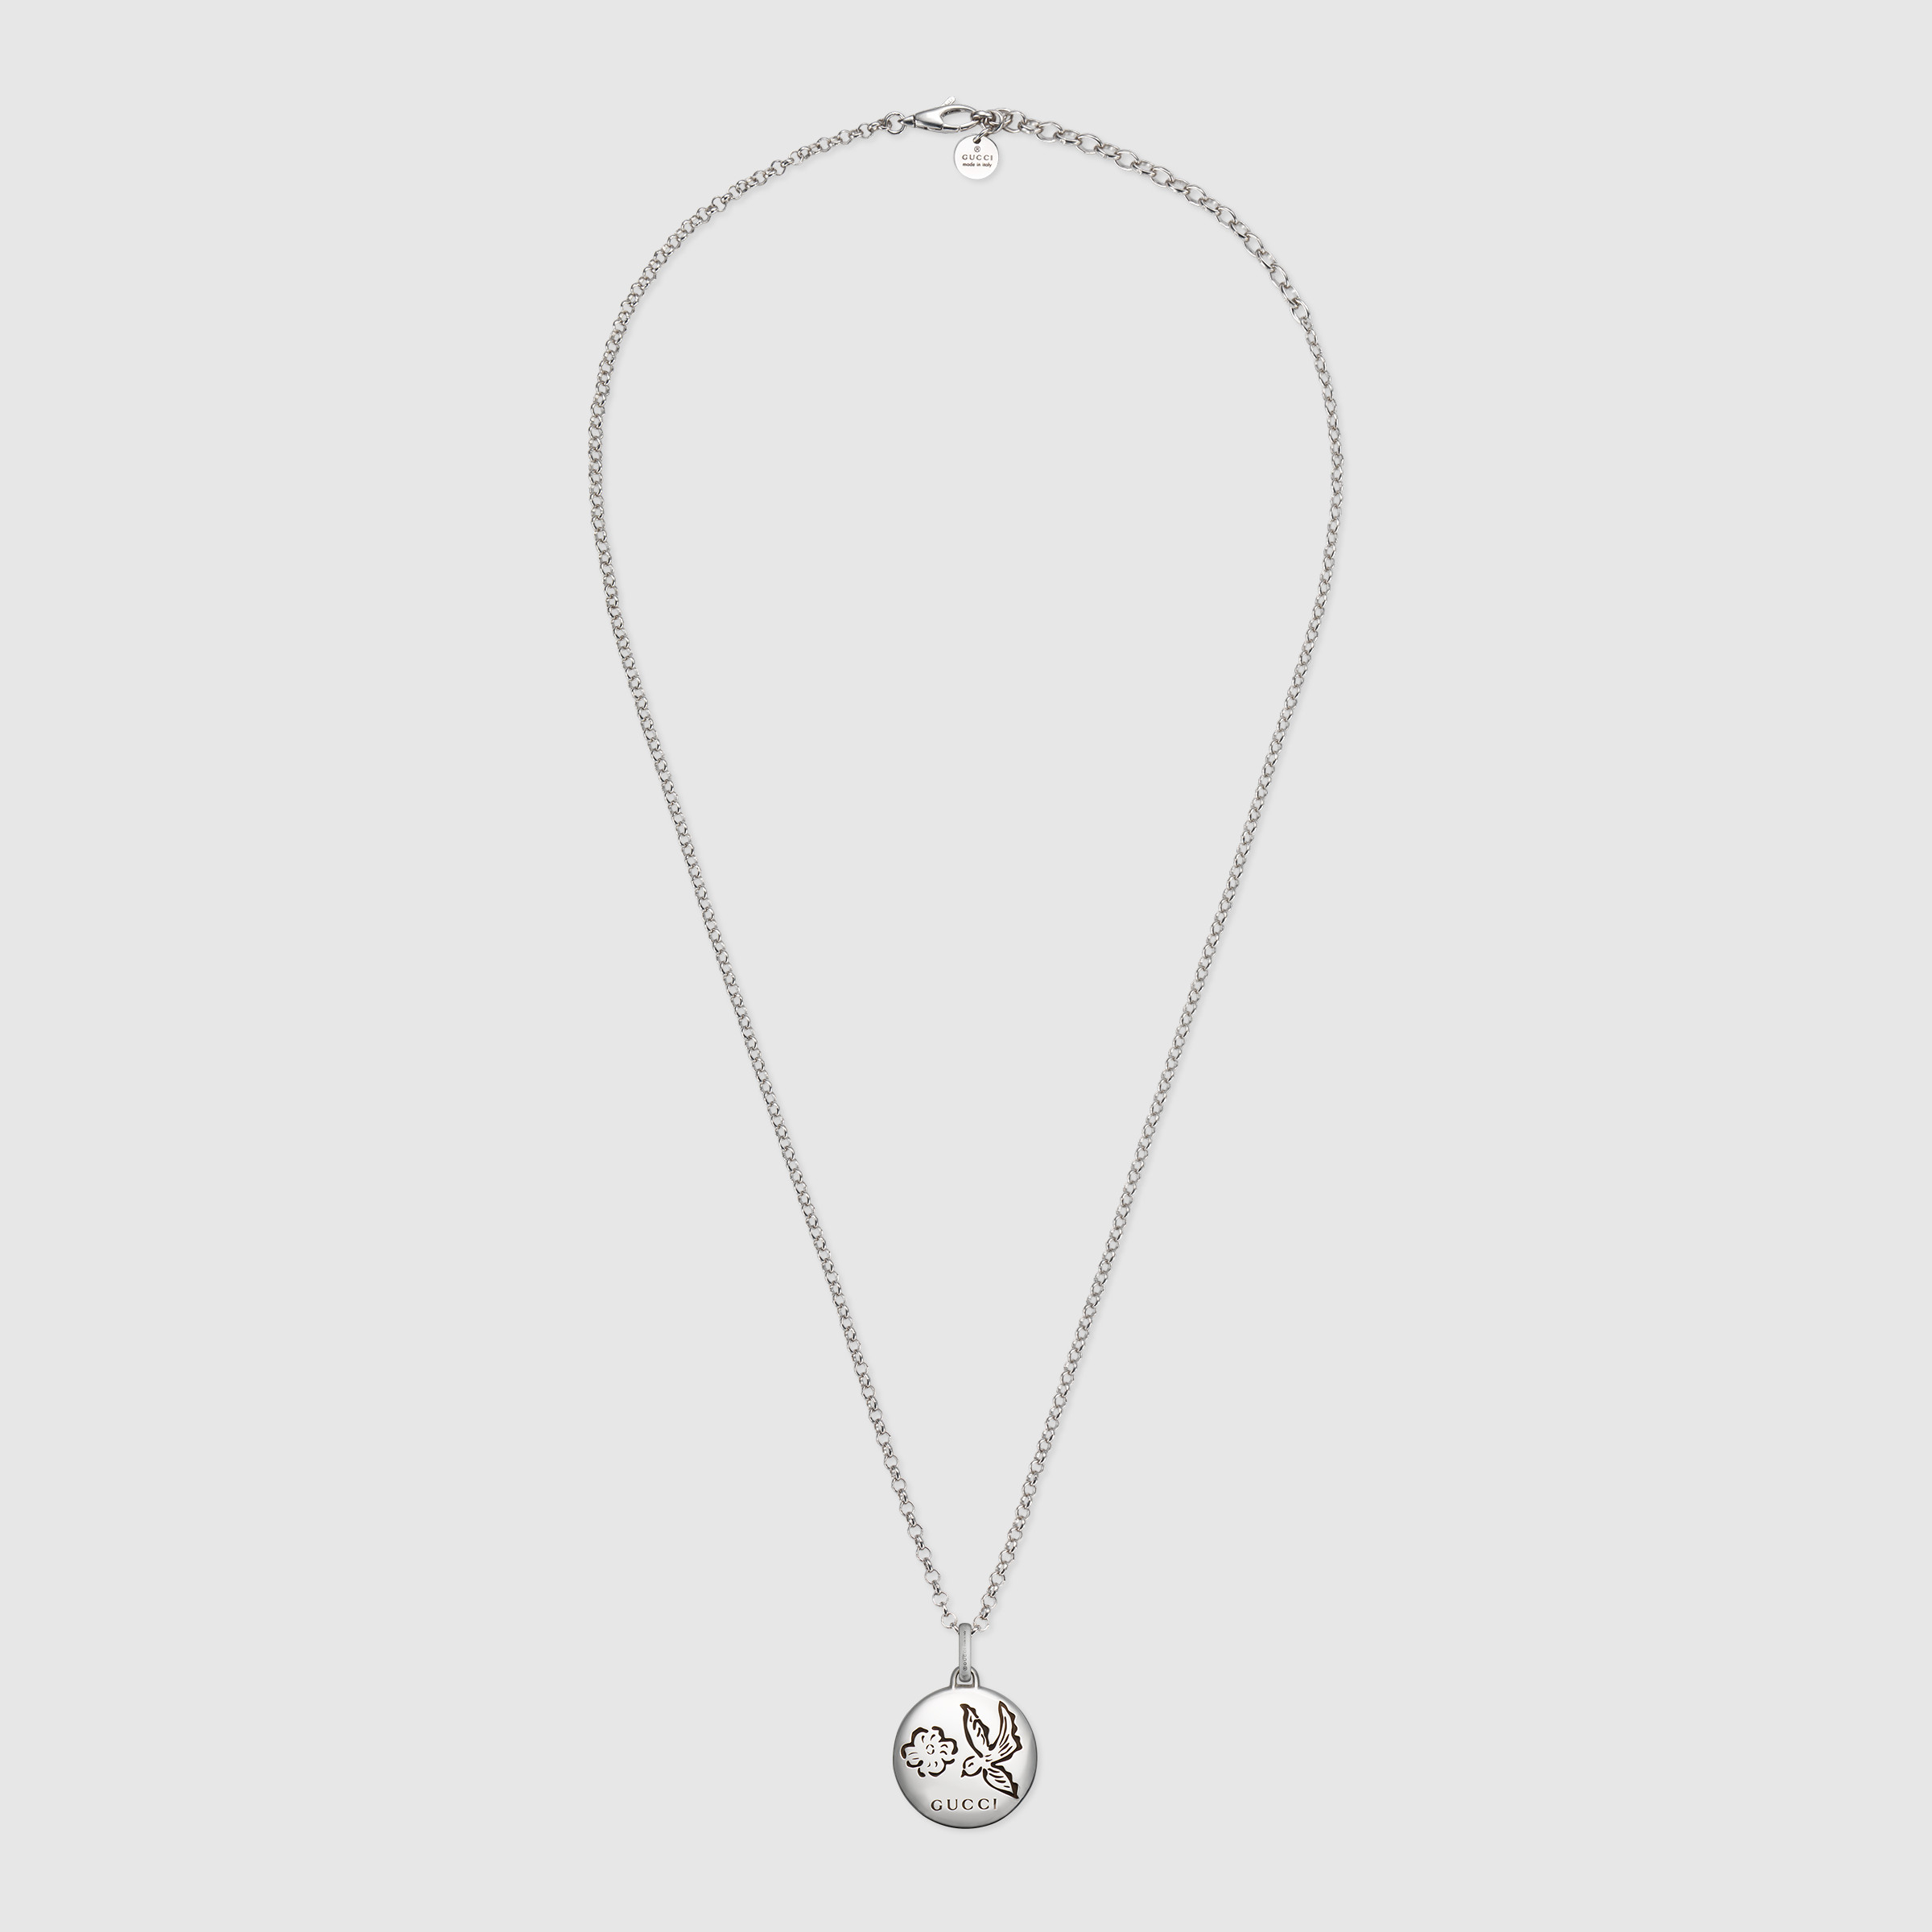 Gucci Blind For Love Necklace In Silver in Sterling Silver 